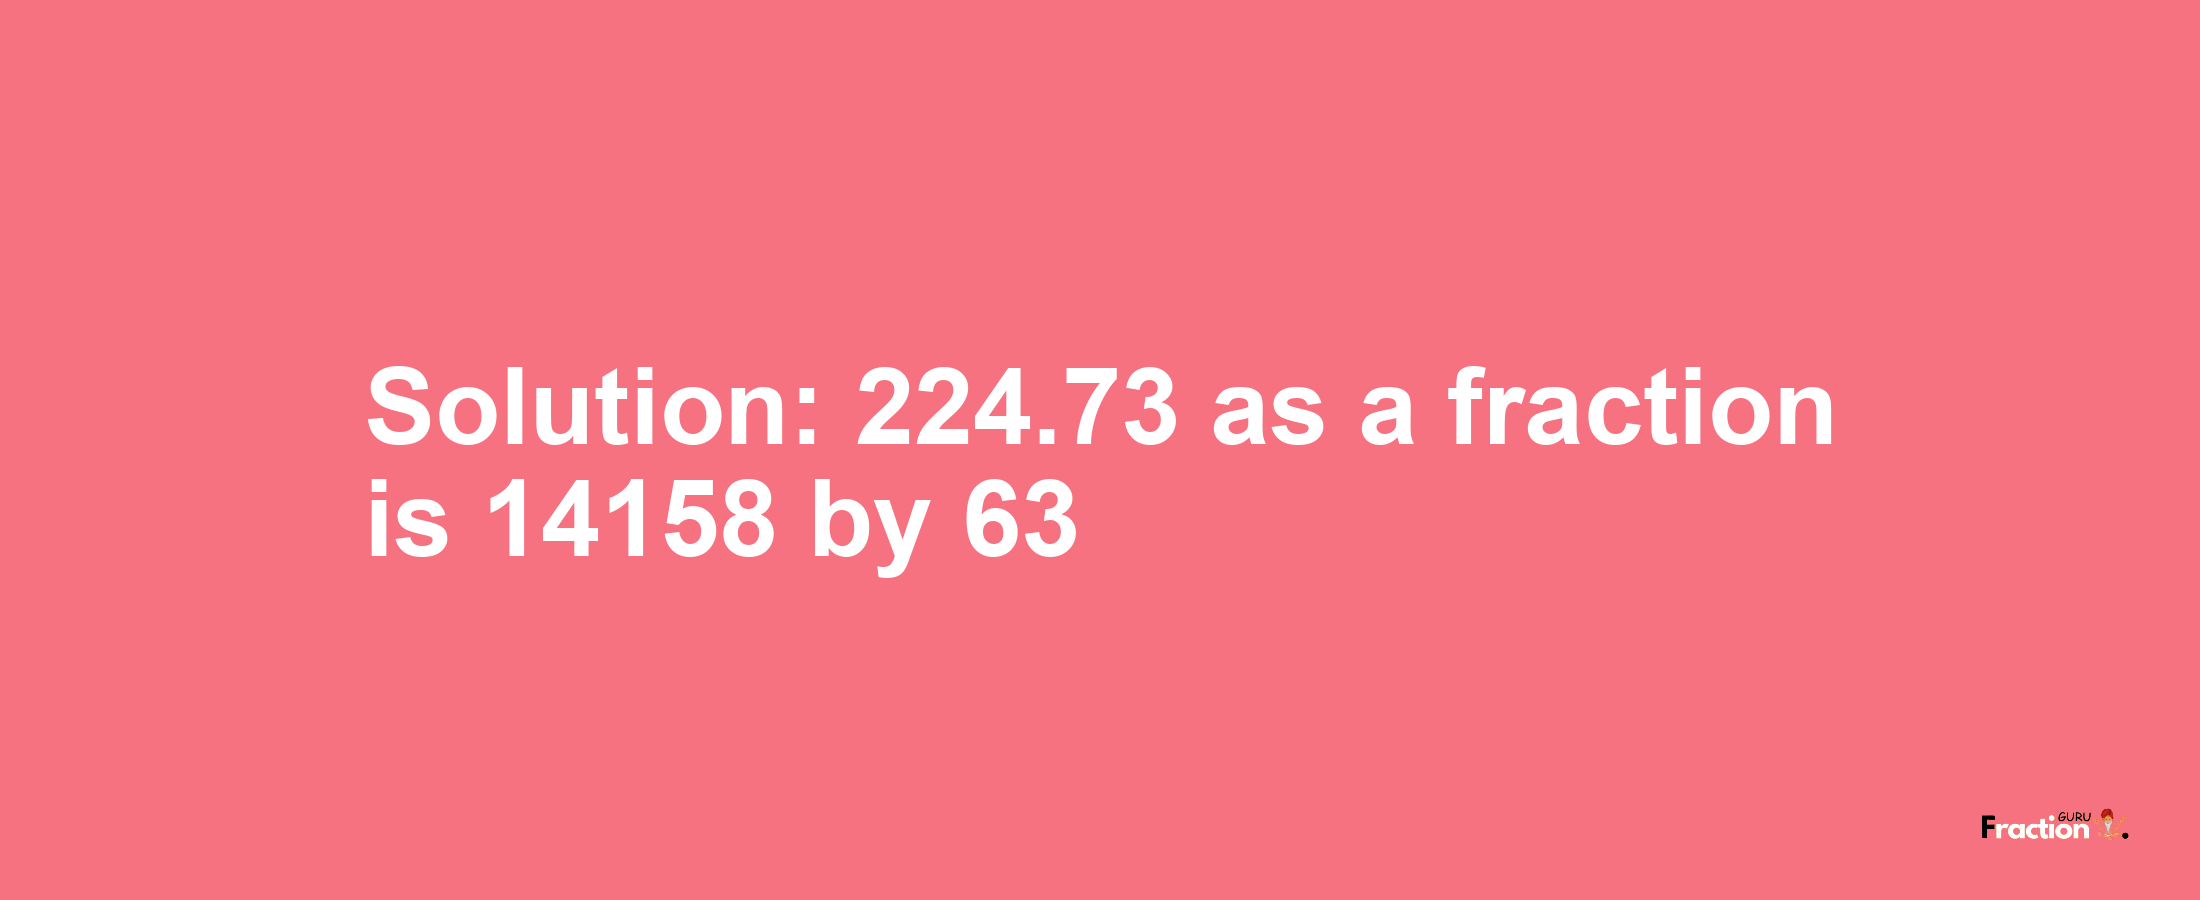 Solution:224.73 as a fraction is 14158/63